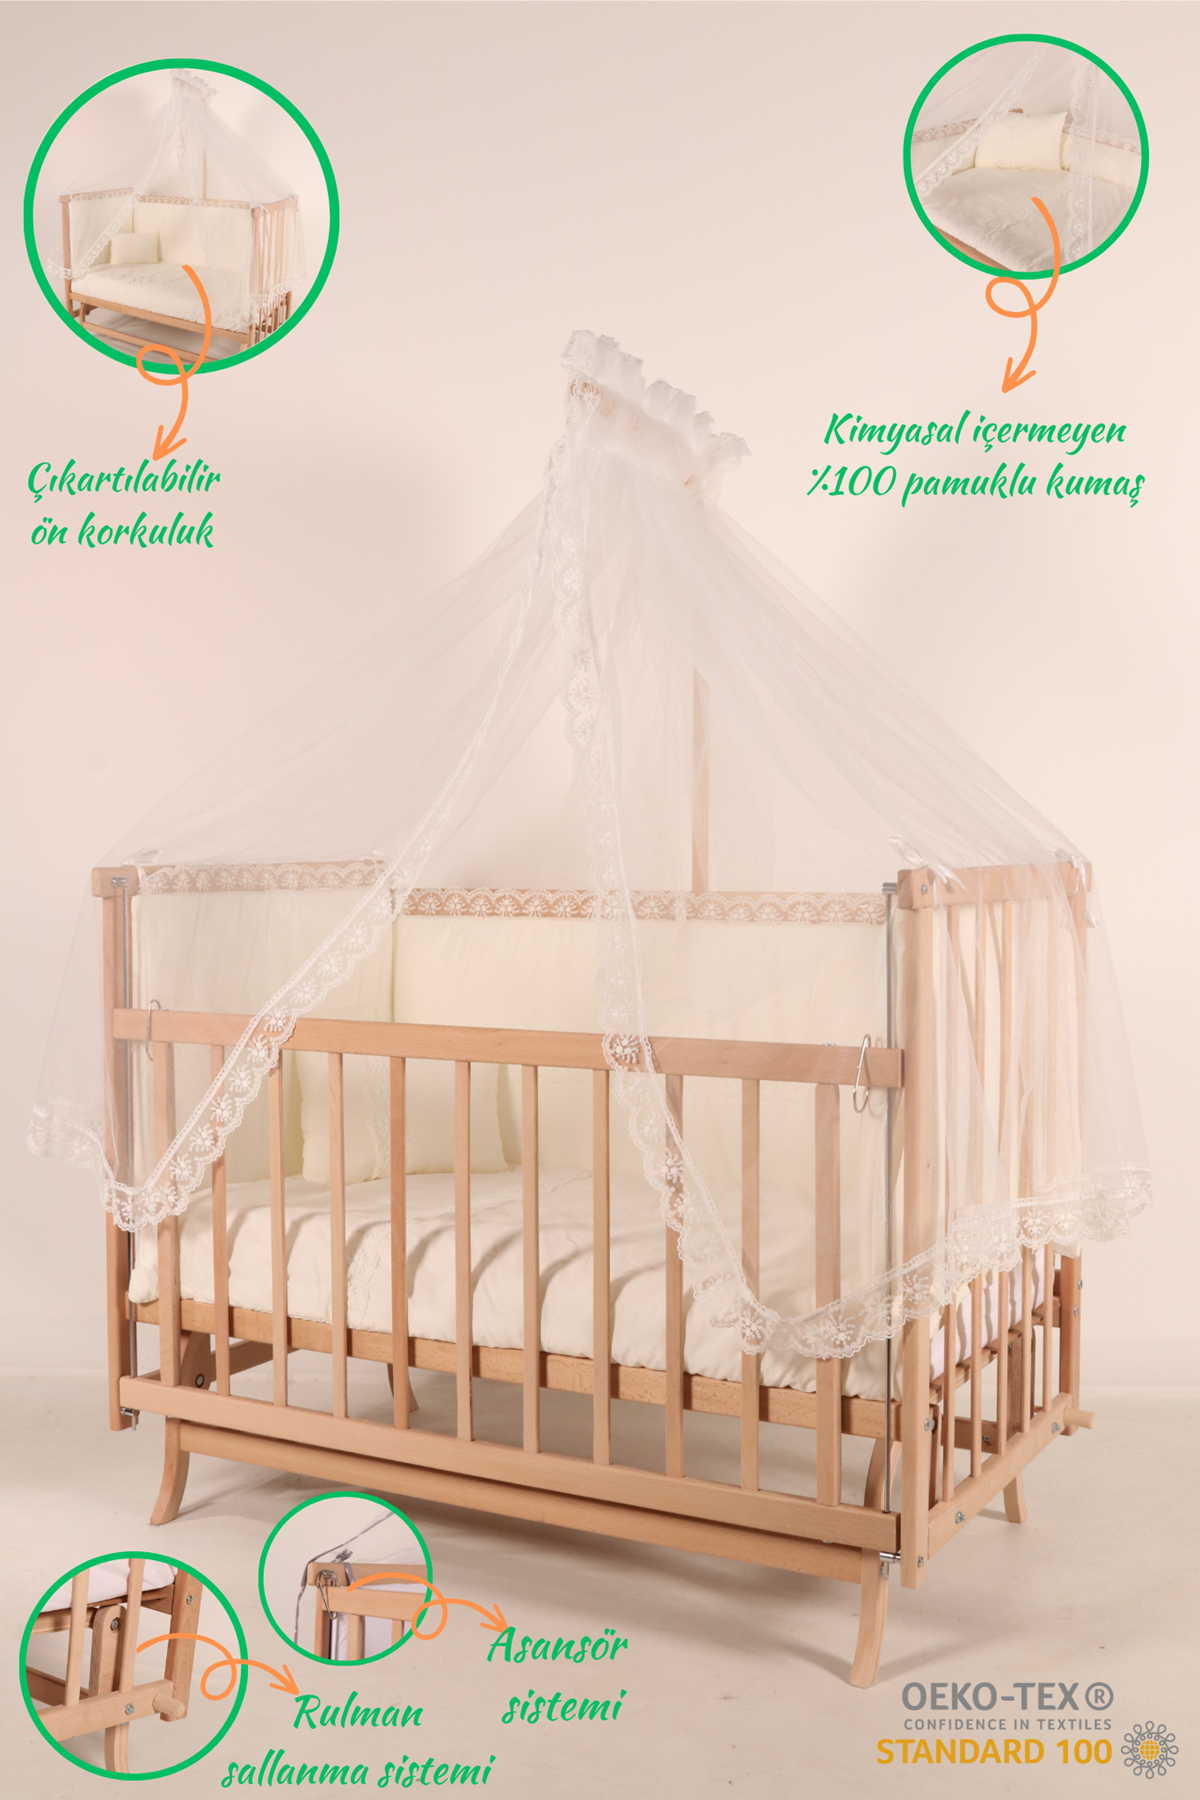 Cream Lacy Graded Natural Bed Baby Cot